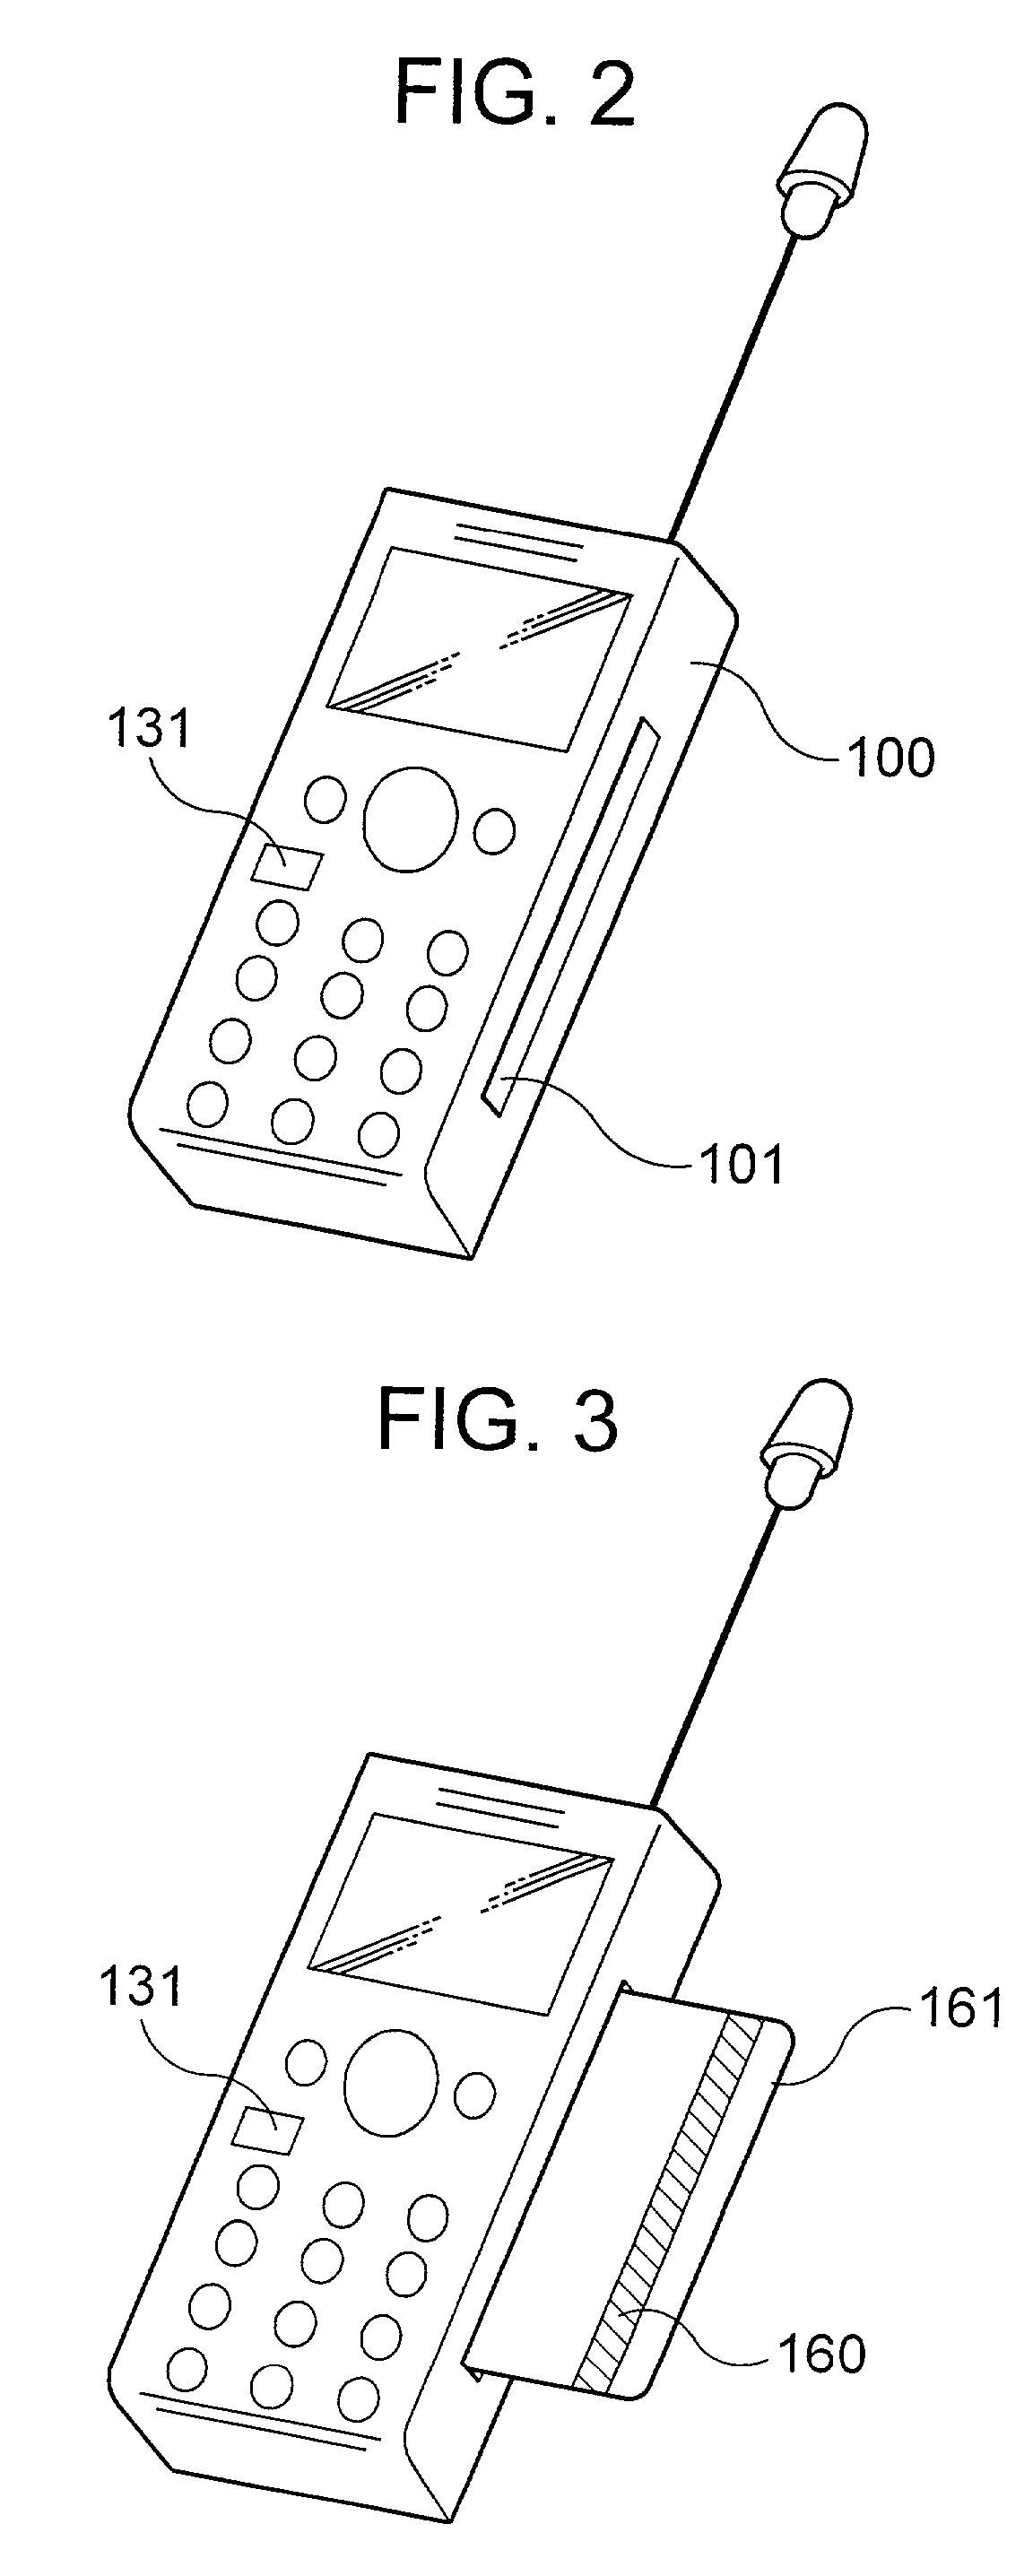 Electronic commerce contracts mediating method and mobile communication network